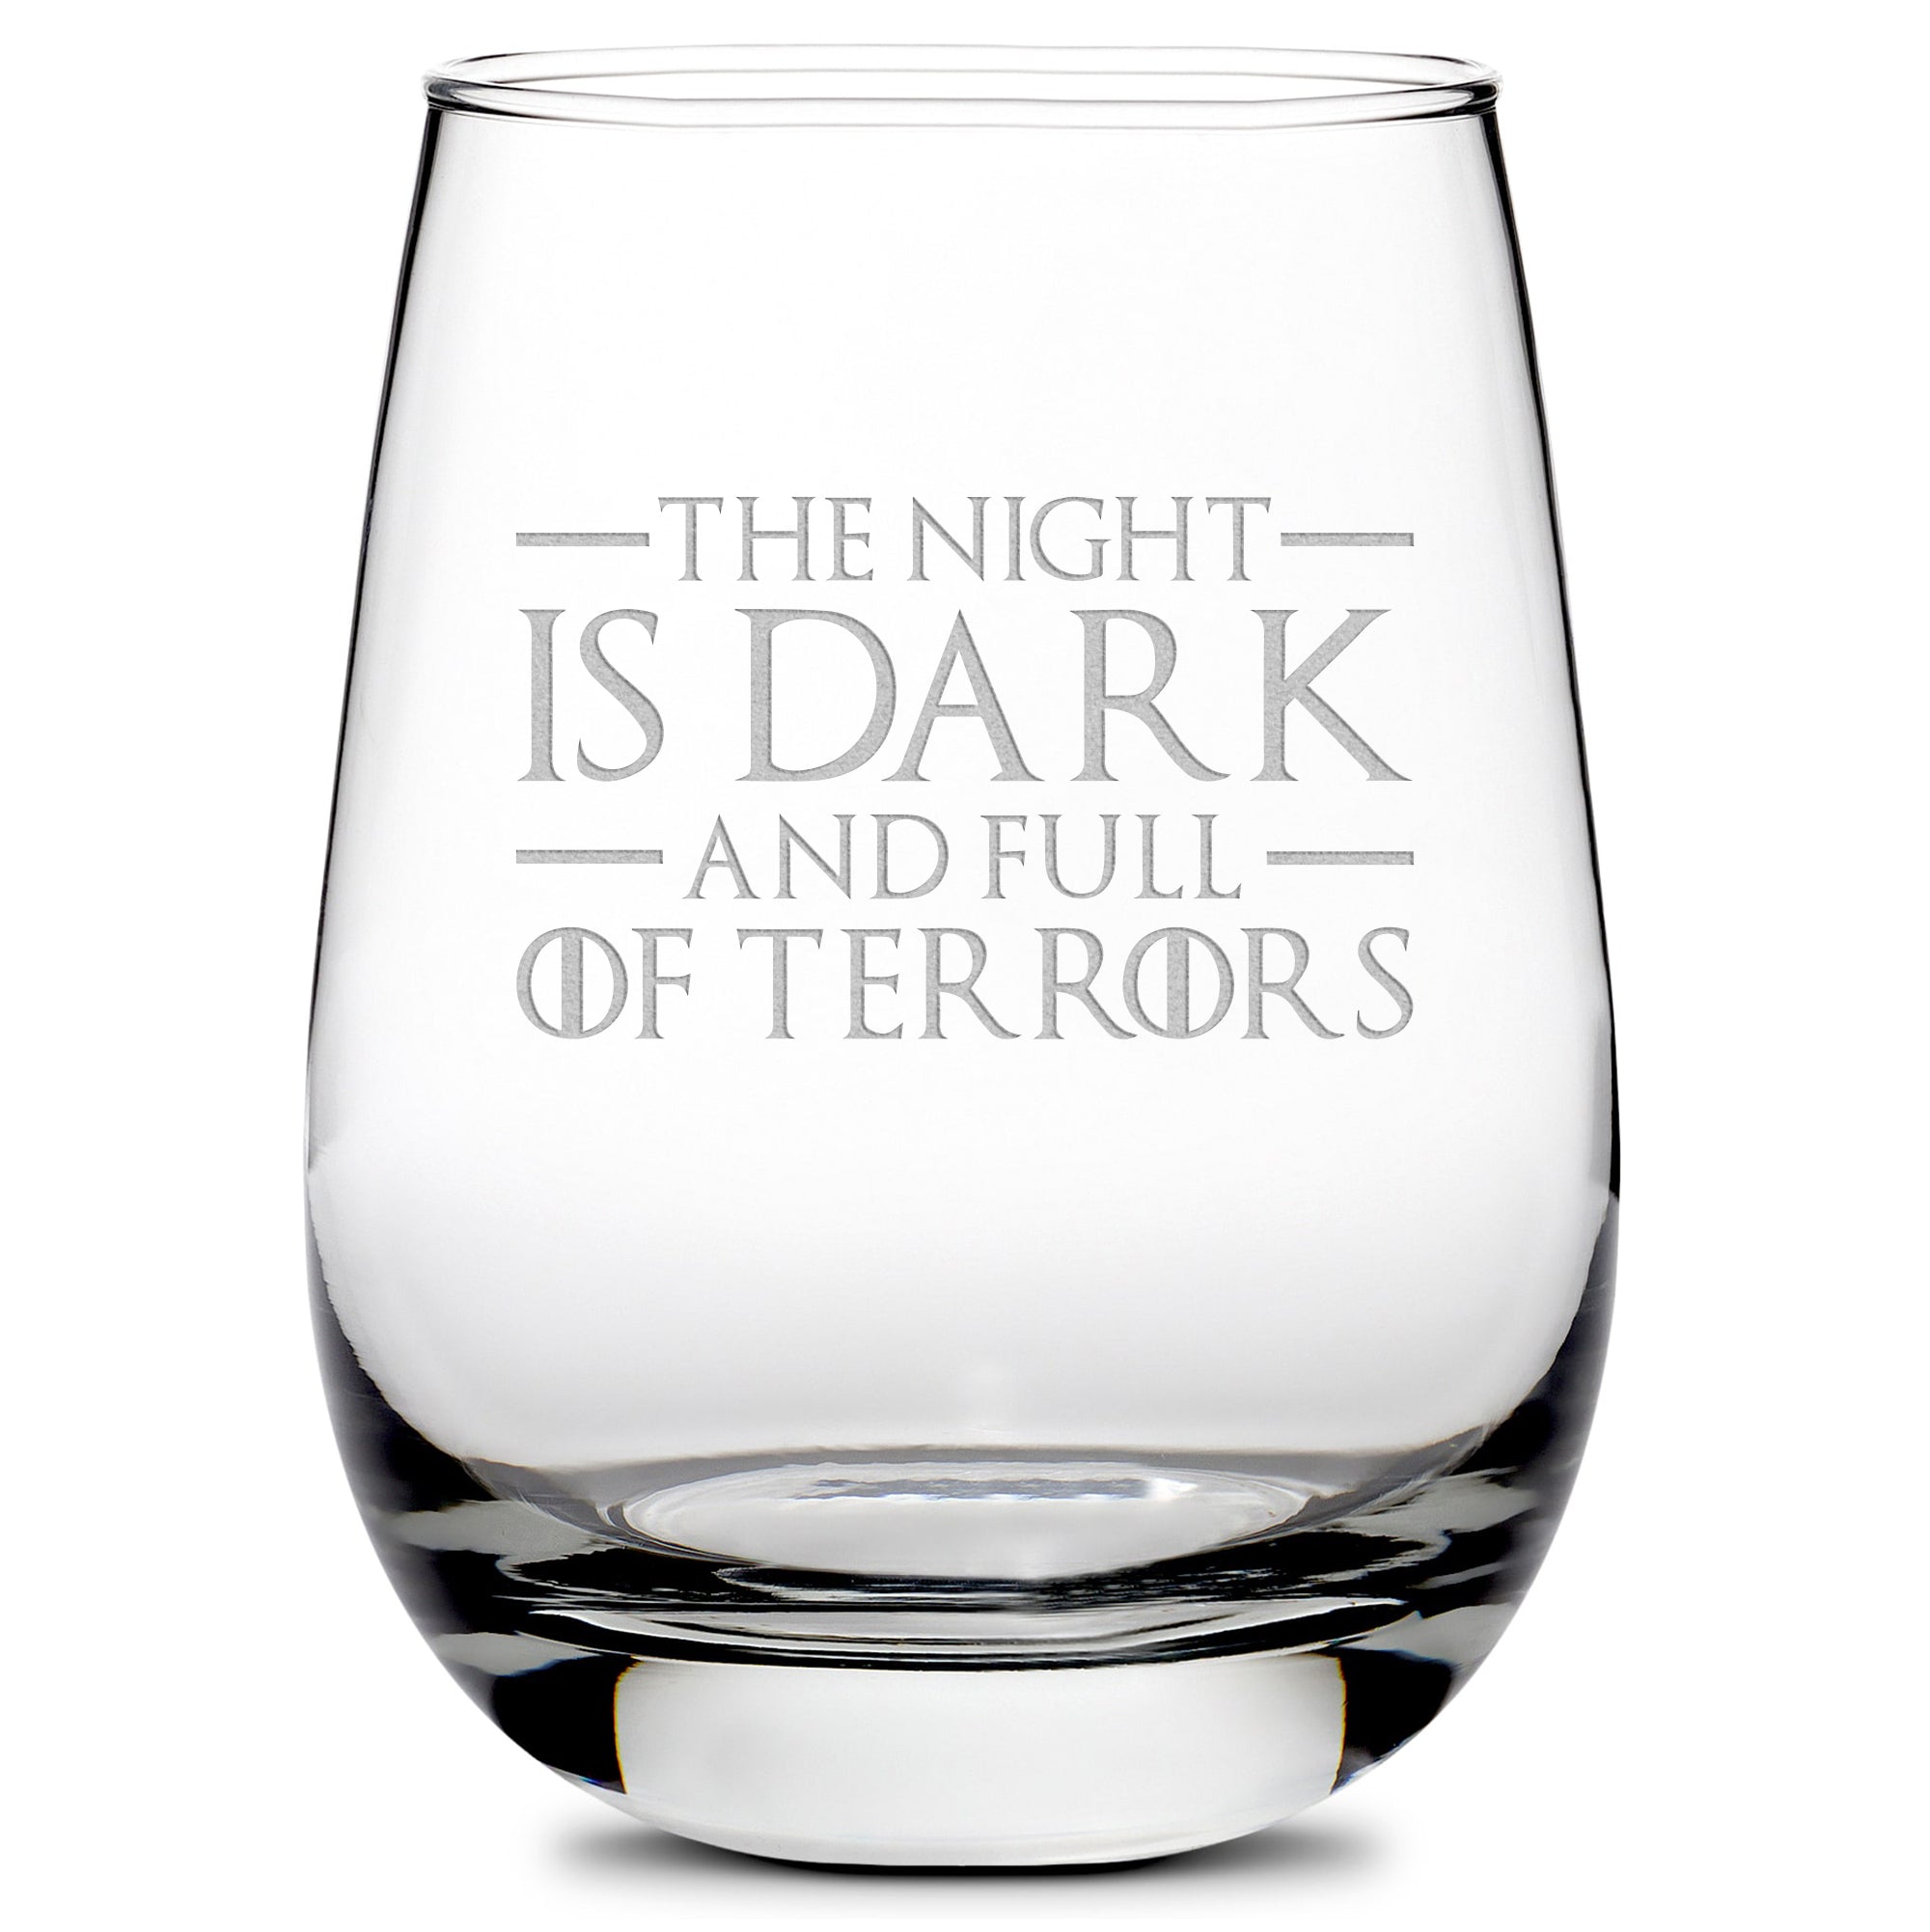 Premium Wine Glass, Game of Thrones, The Night is Dark and Full of Terrors, 16oz, Laser Etched or Hand Etched